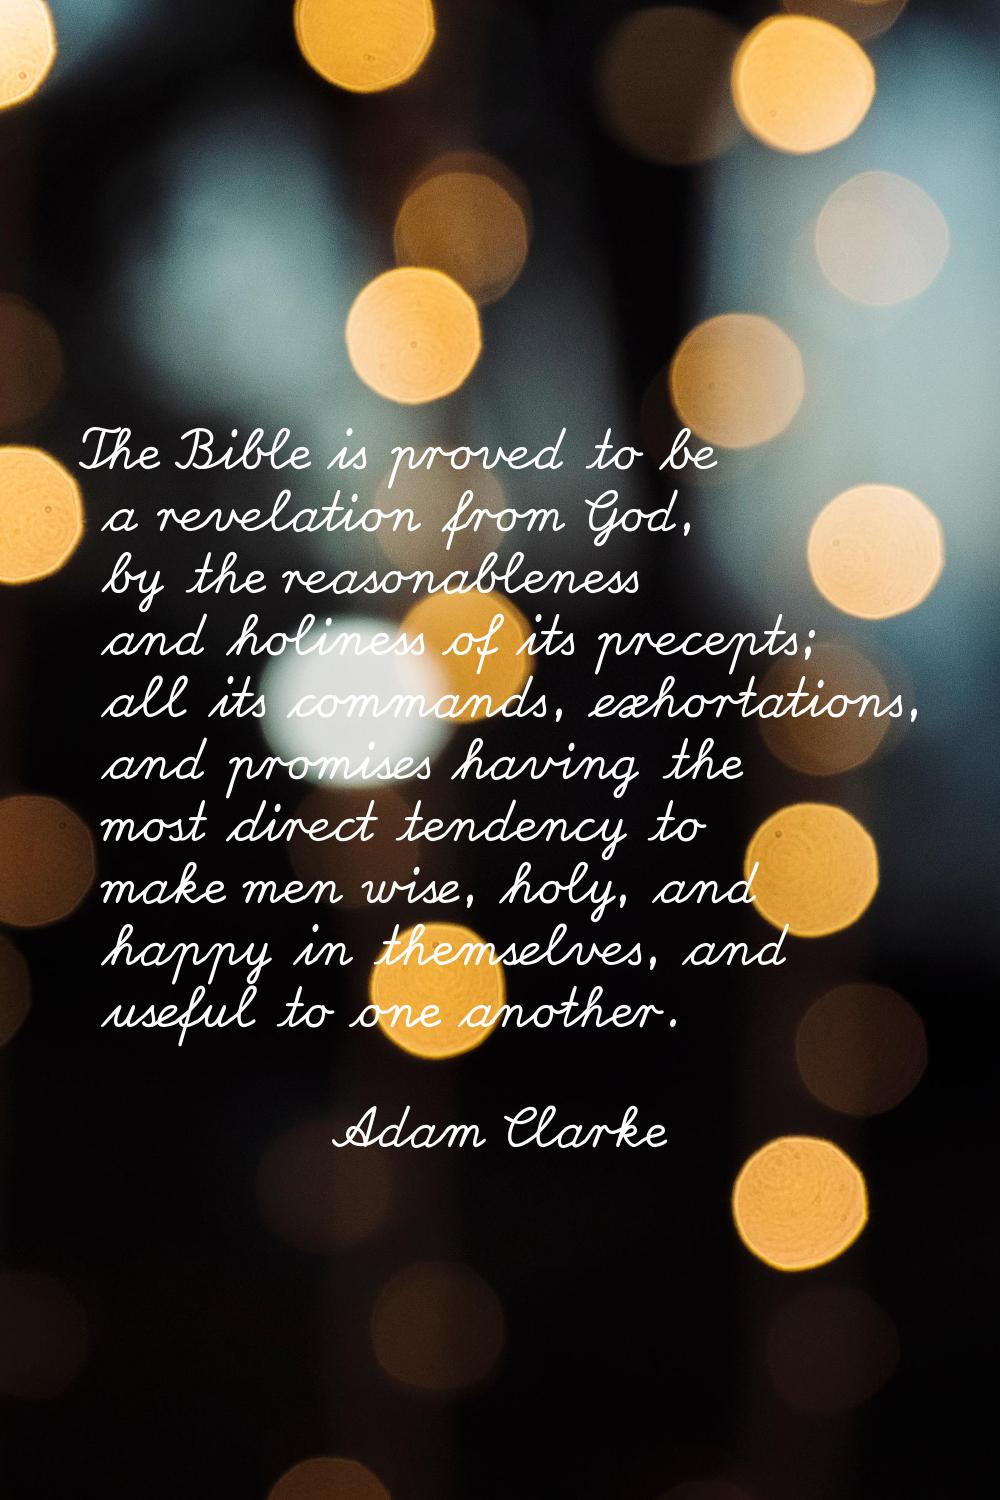 The Bible is proved to be a revelation from God, by the reasonableness and holiness of its precepts